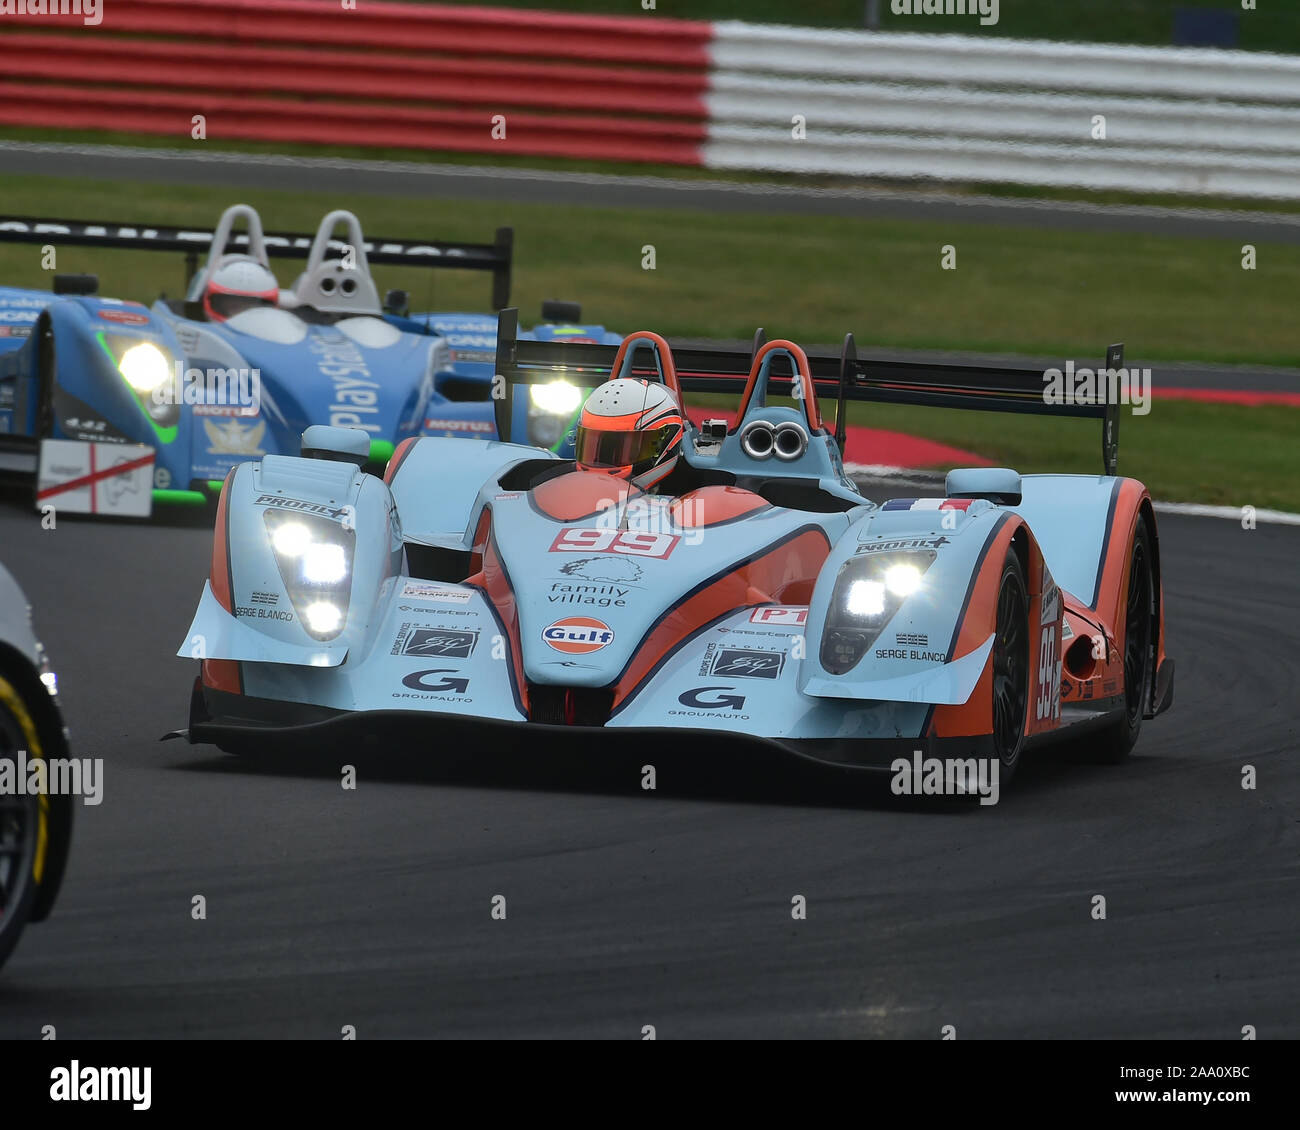 Jamie Constable, Pescarolo LMP1, Aston Martin Trophy for Masters Endurance Legends, Silverstone Classic, July 2019, Silverstone, Northamptonshire, Eng Stock Photo